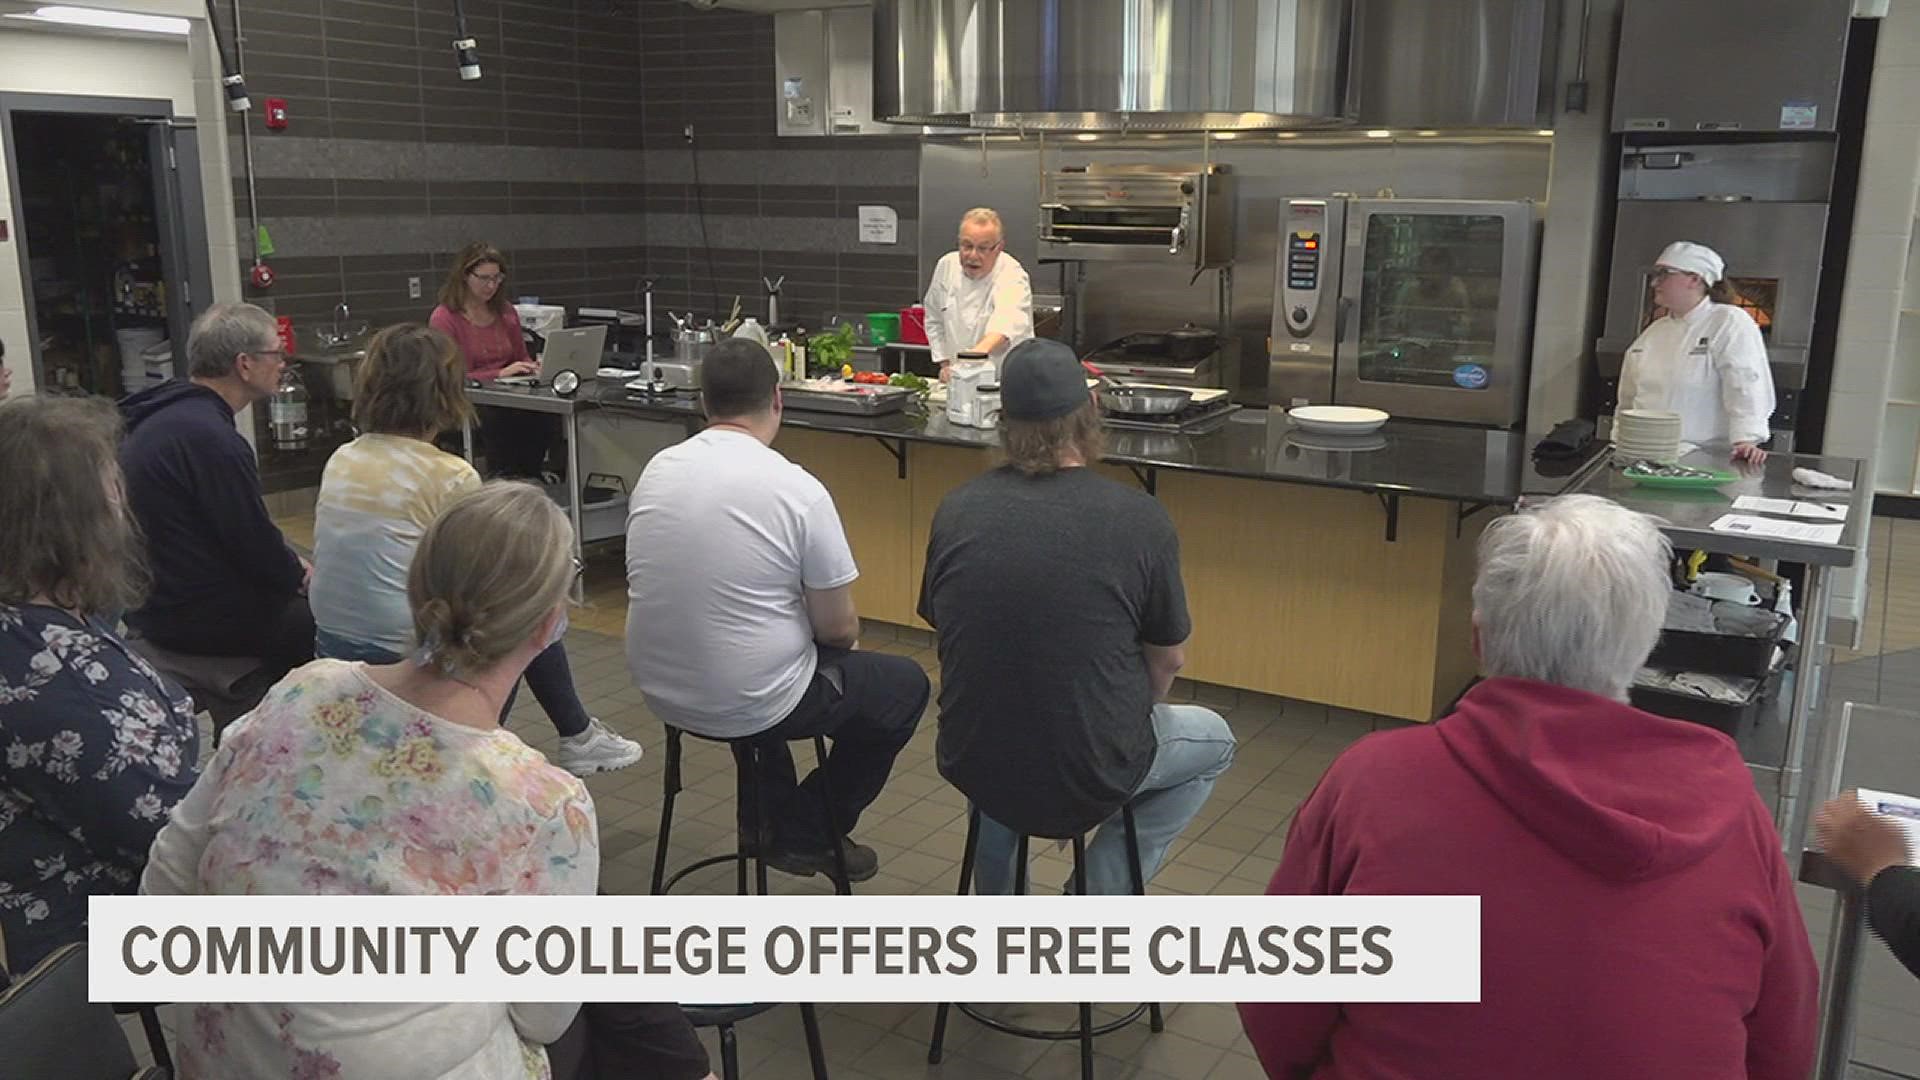 The college is honoring Community College Month by offering free education to their community.